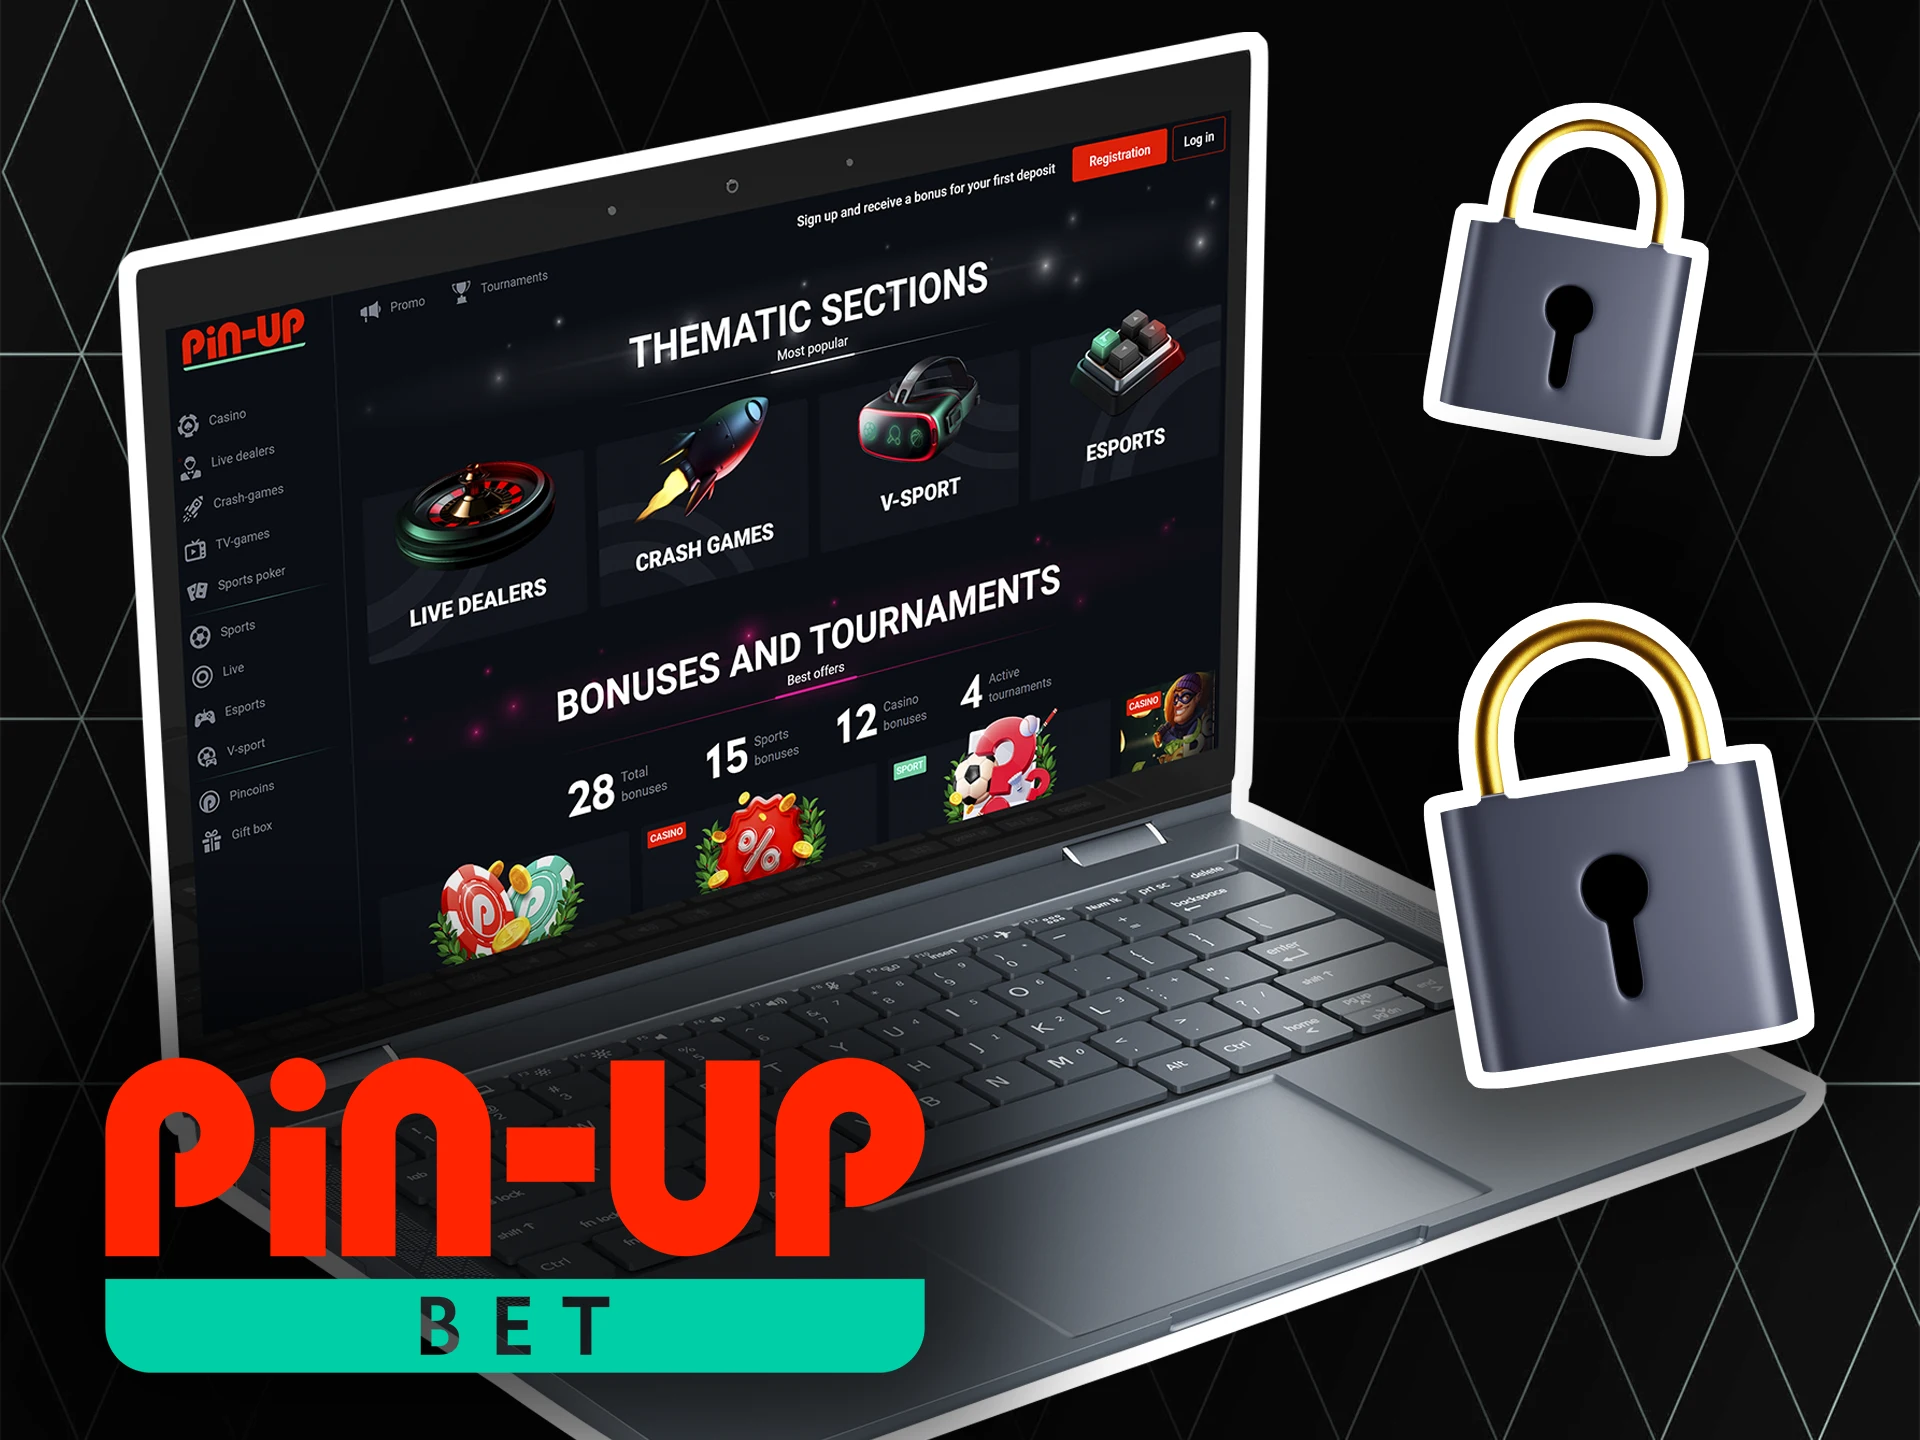 With Pin-Up you can be sure that your data and money is under the strong protection.